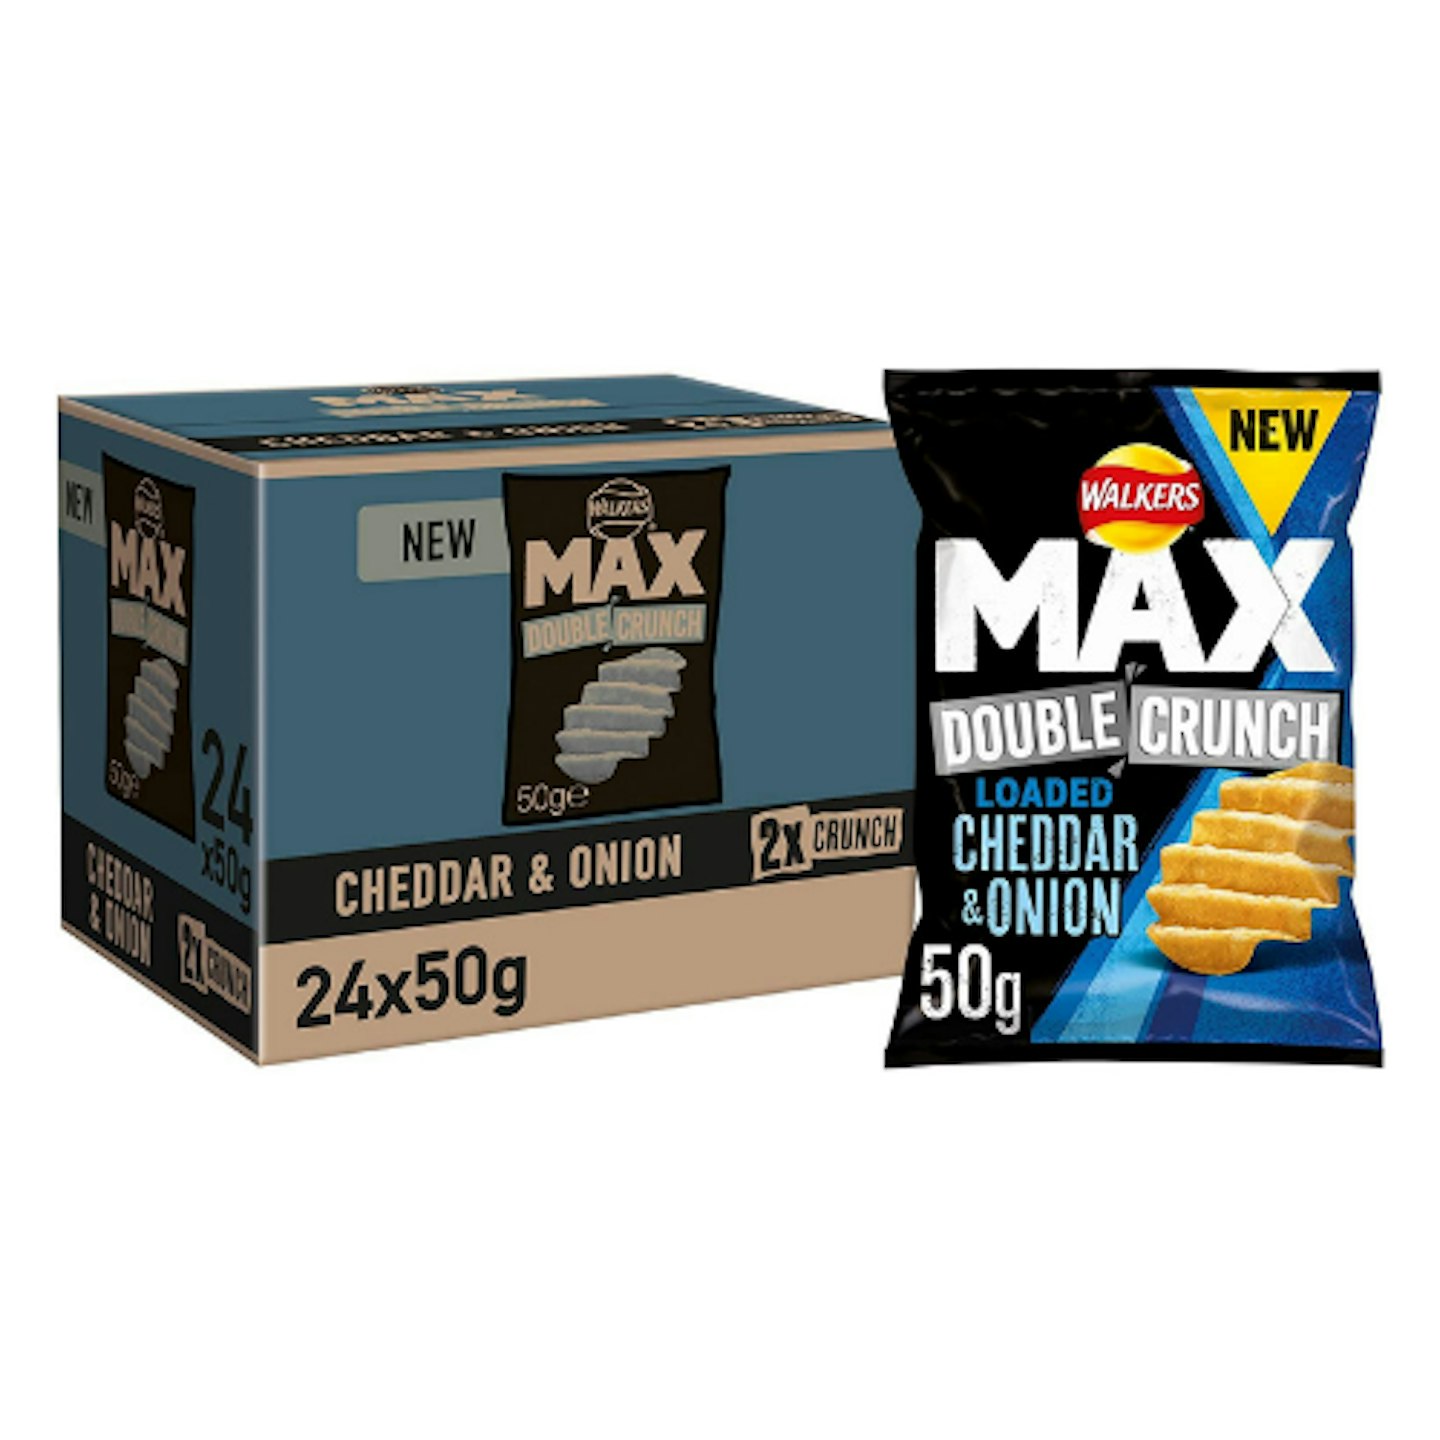 Walkers Max Double Crunch Loaded Cheddar and Onion Crisps, 50g (Case of 24)